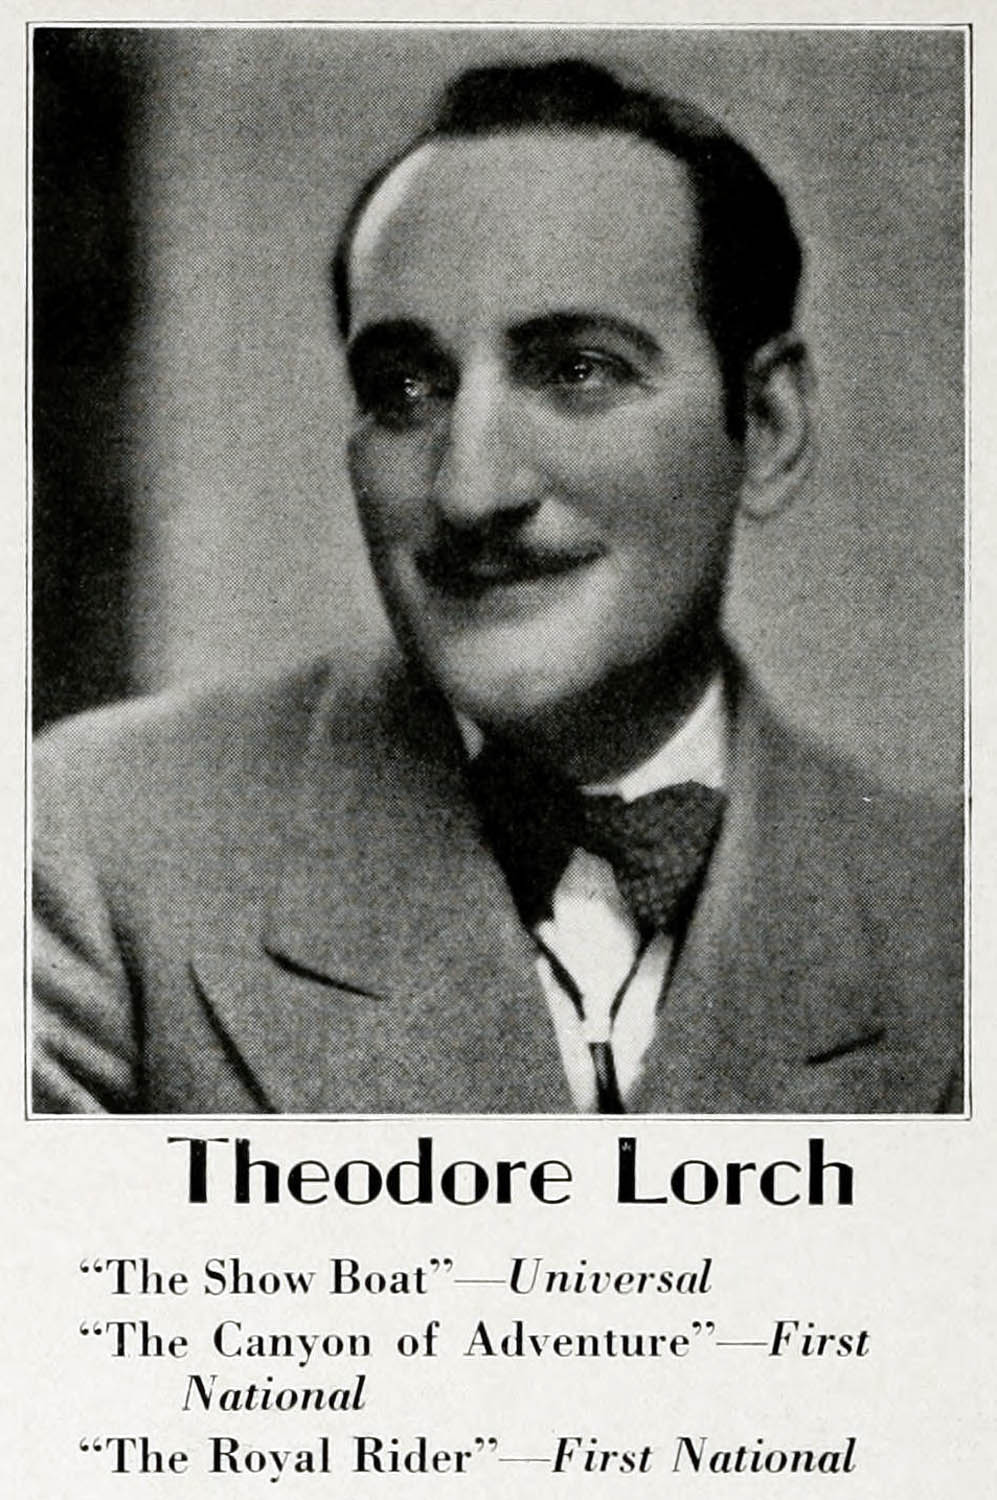 Ted Lorch